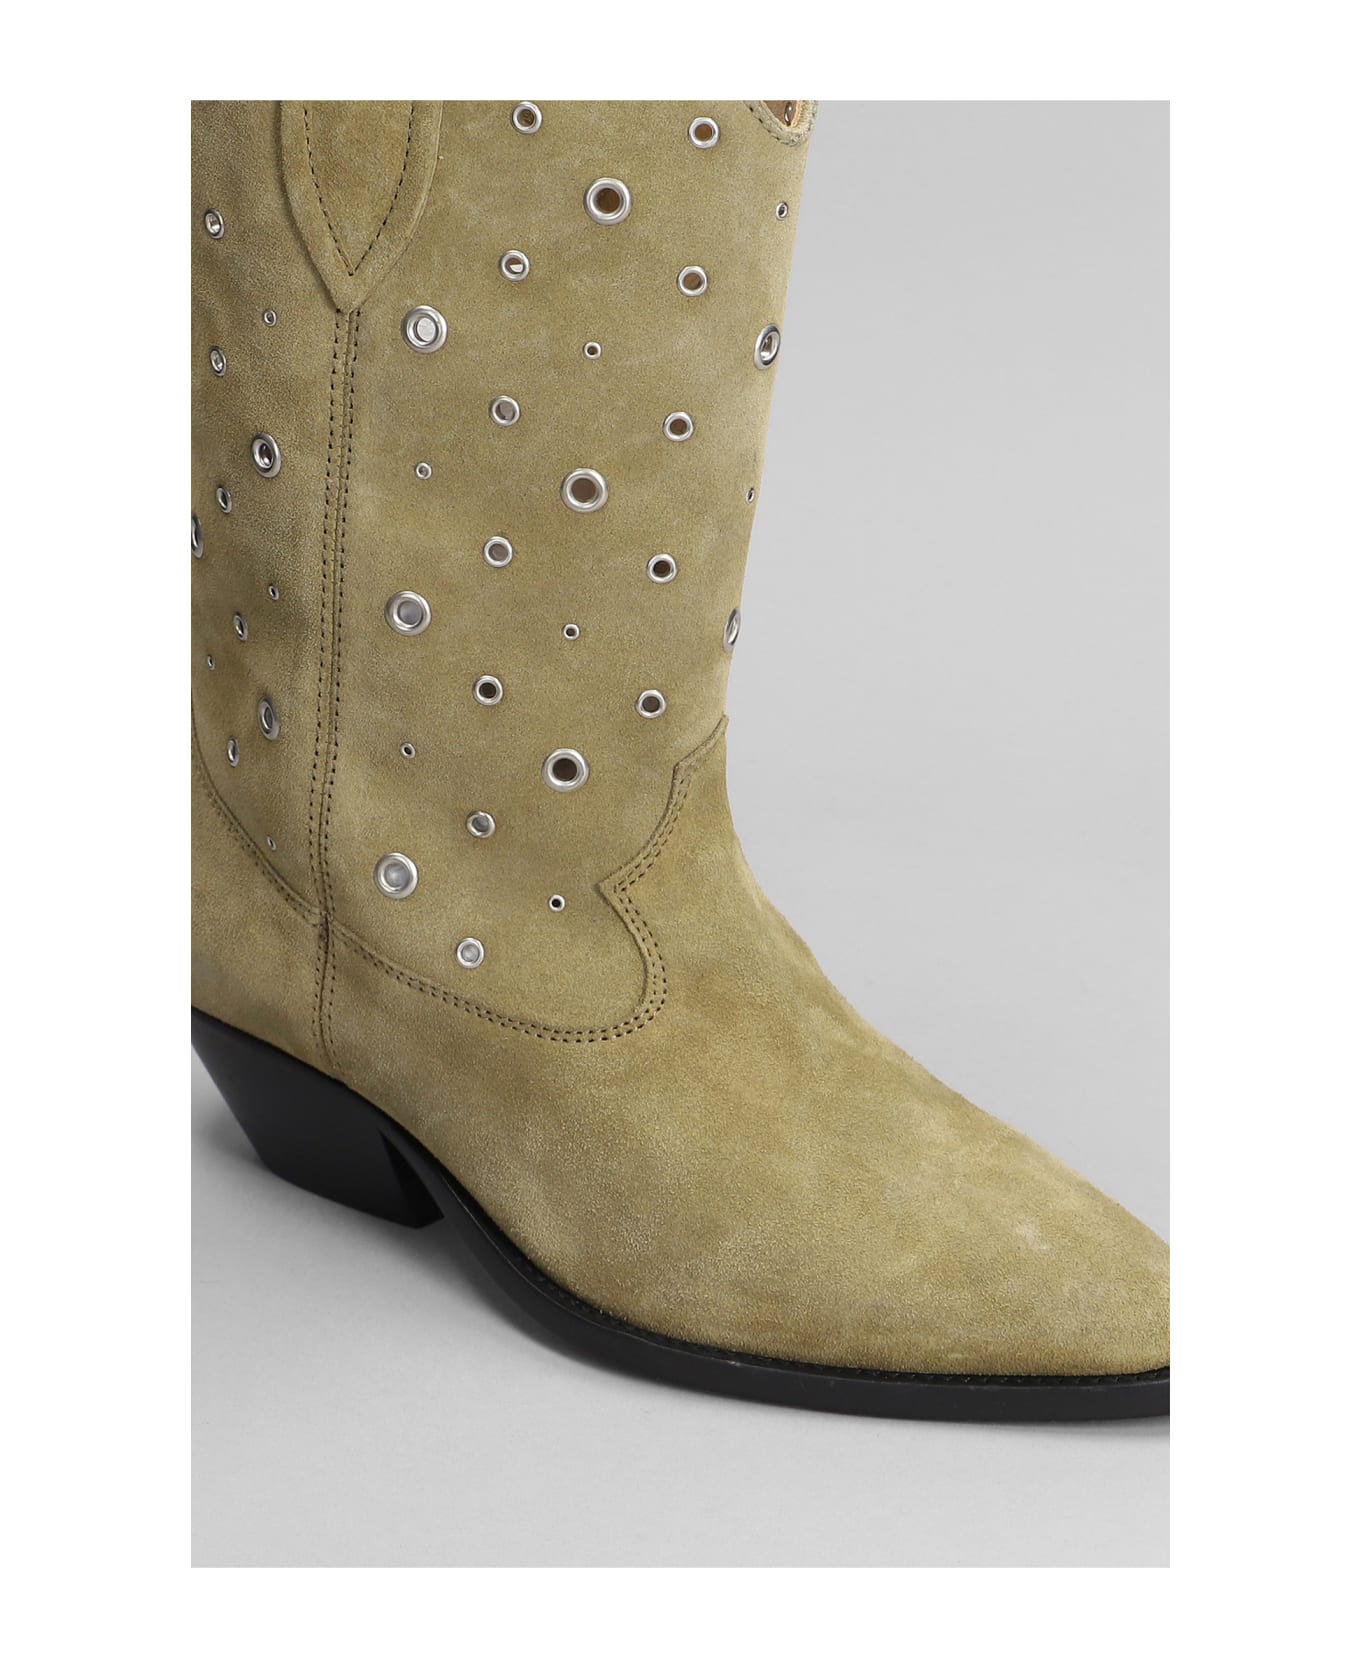 Isabel Marant Western Boots With Studs In Suede - Beige